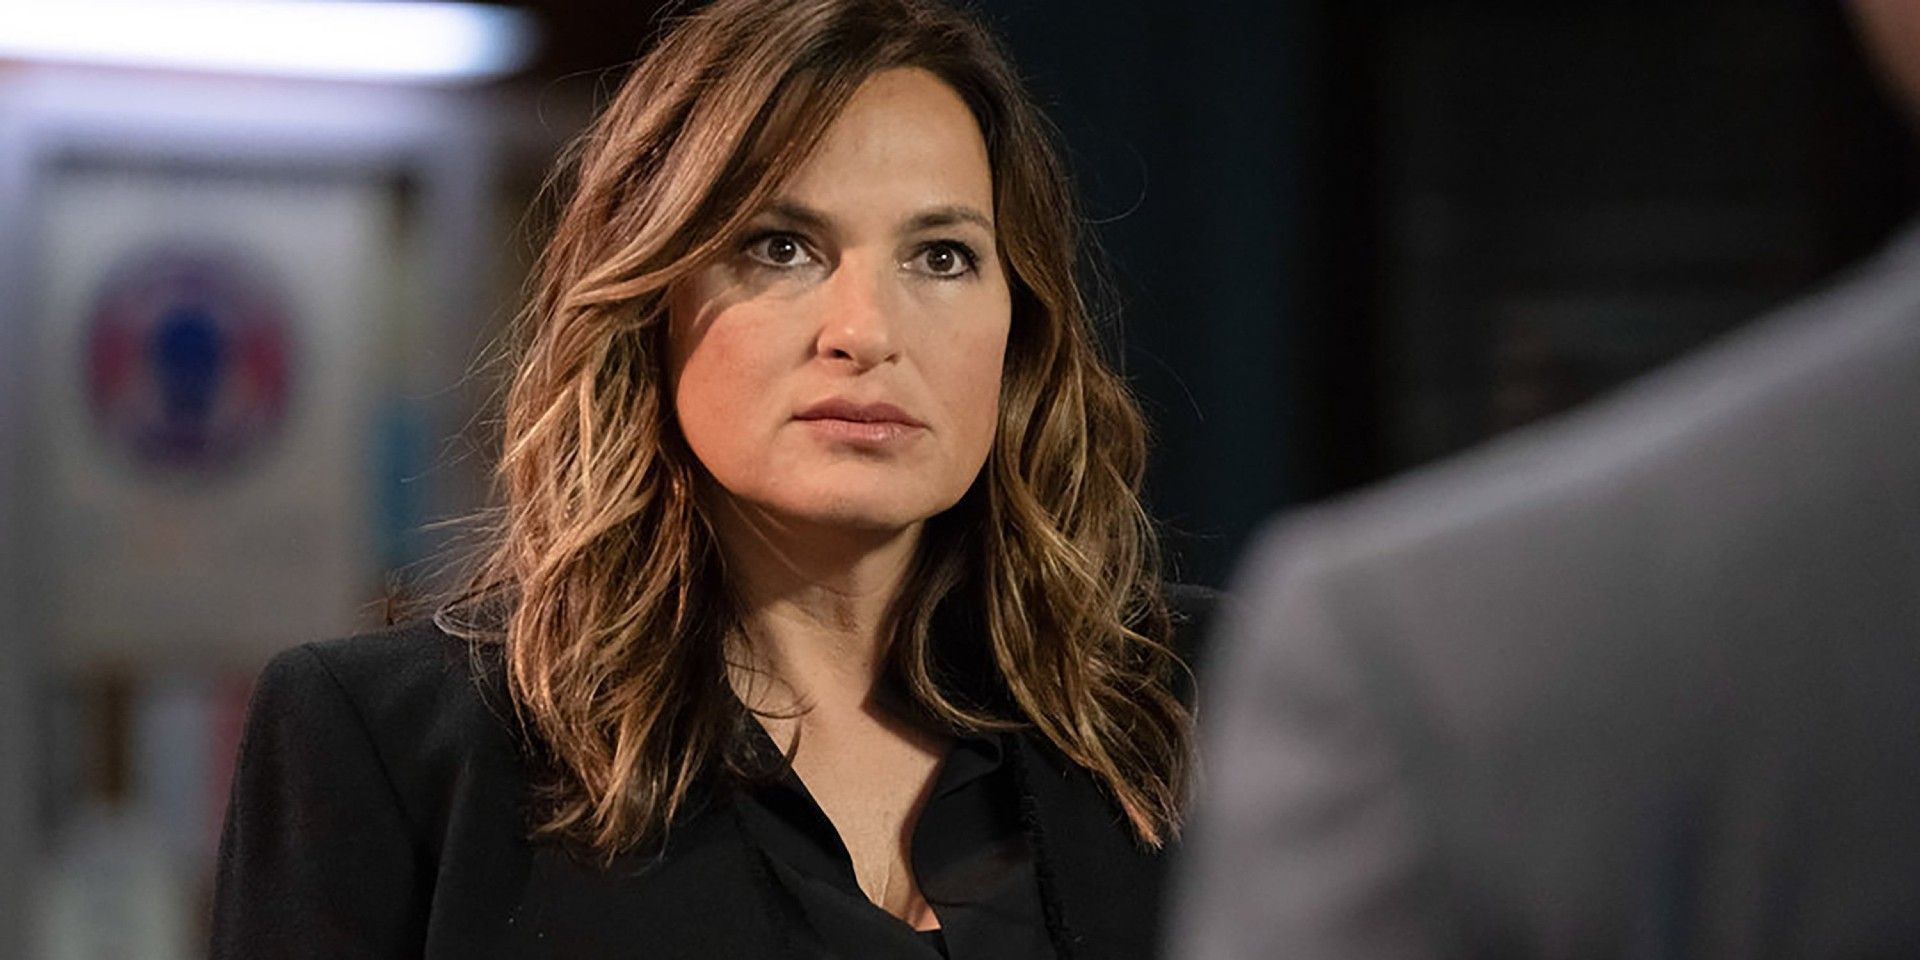 Law & Order: SVU Showrunner Announces His Exit In Emotional Post